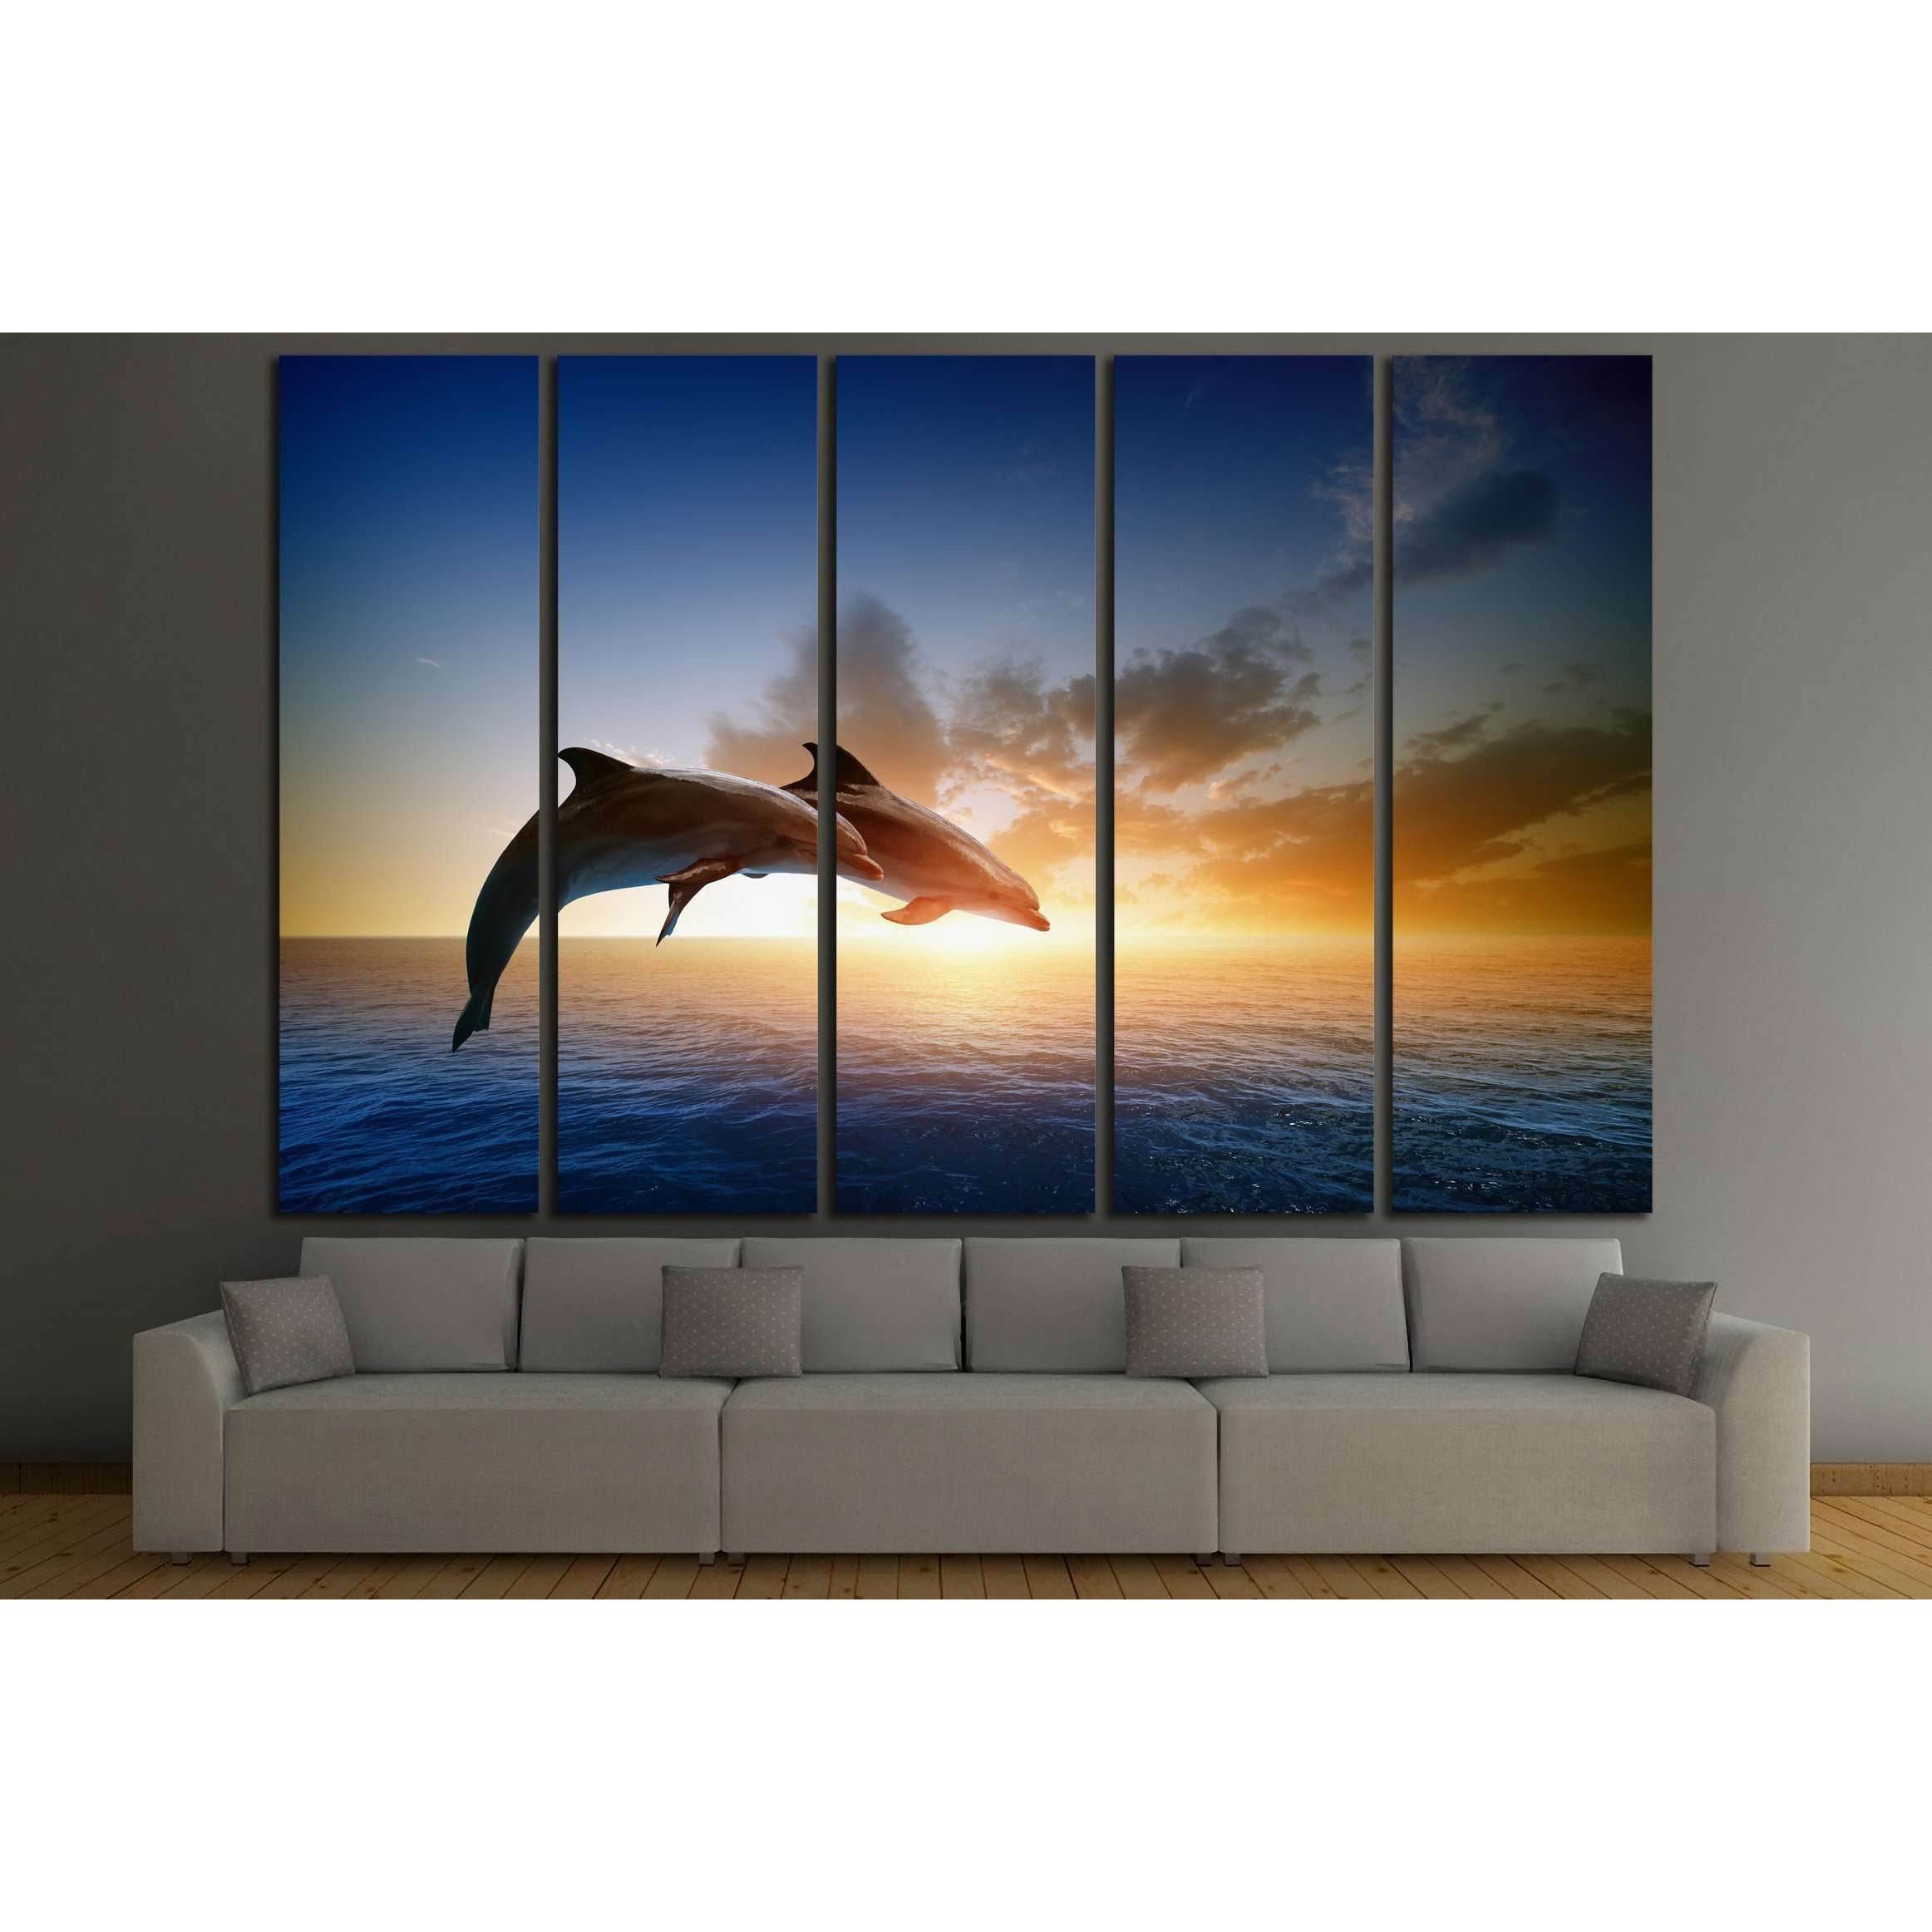 Couple jumping dolphins, beautiful sea sunset №2792 Ready to Hang Canvas Print